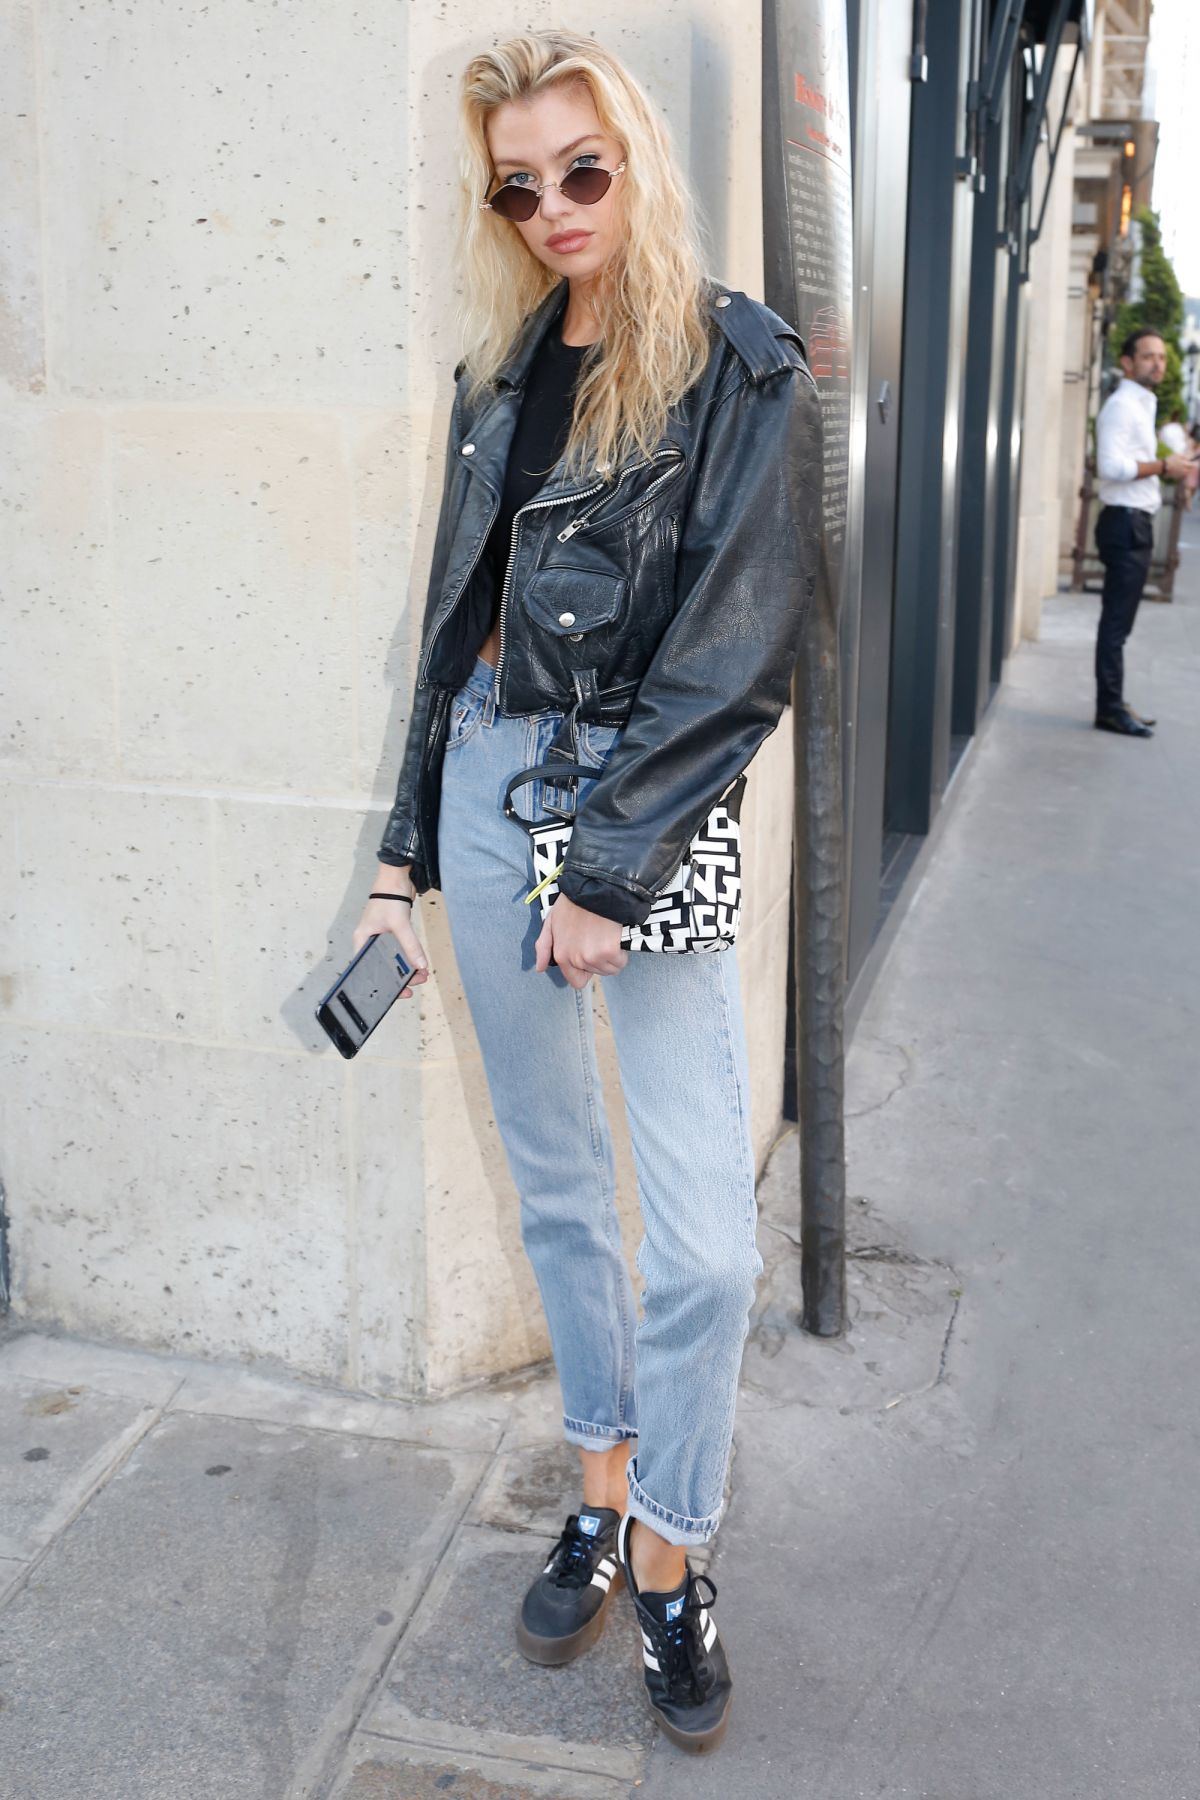 STELLA MAXWELL in Denim Out and About in Paris 07/01/2019 – HawtCelebs